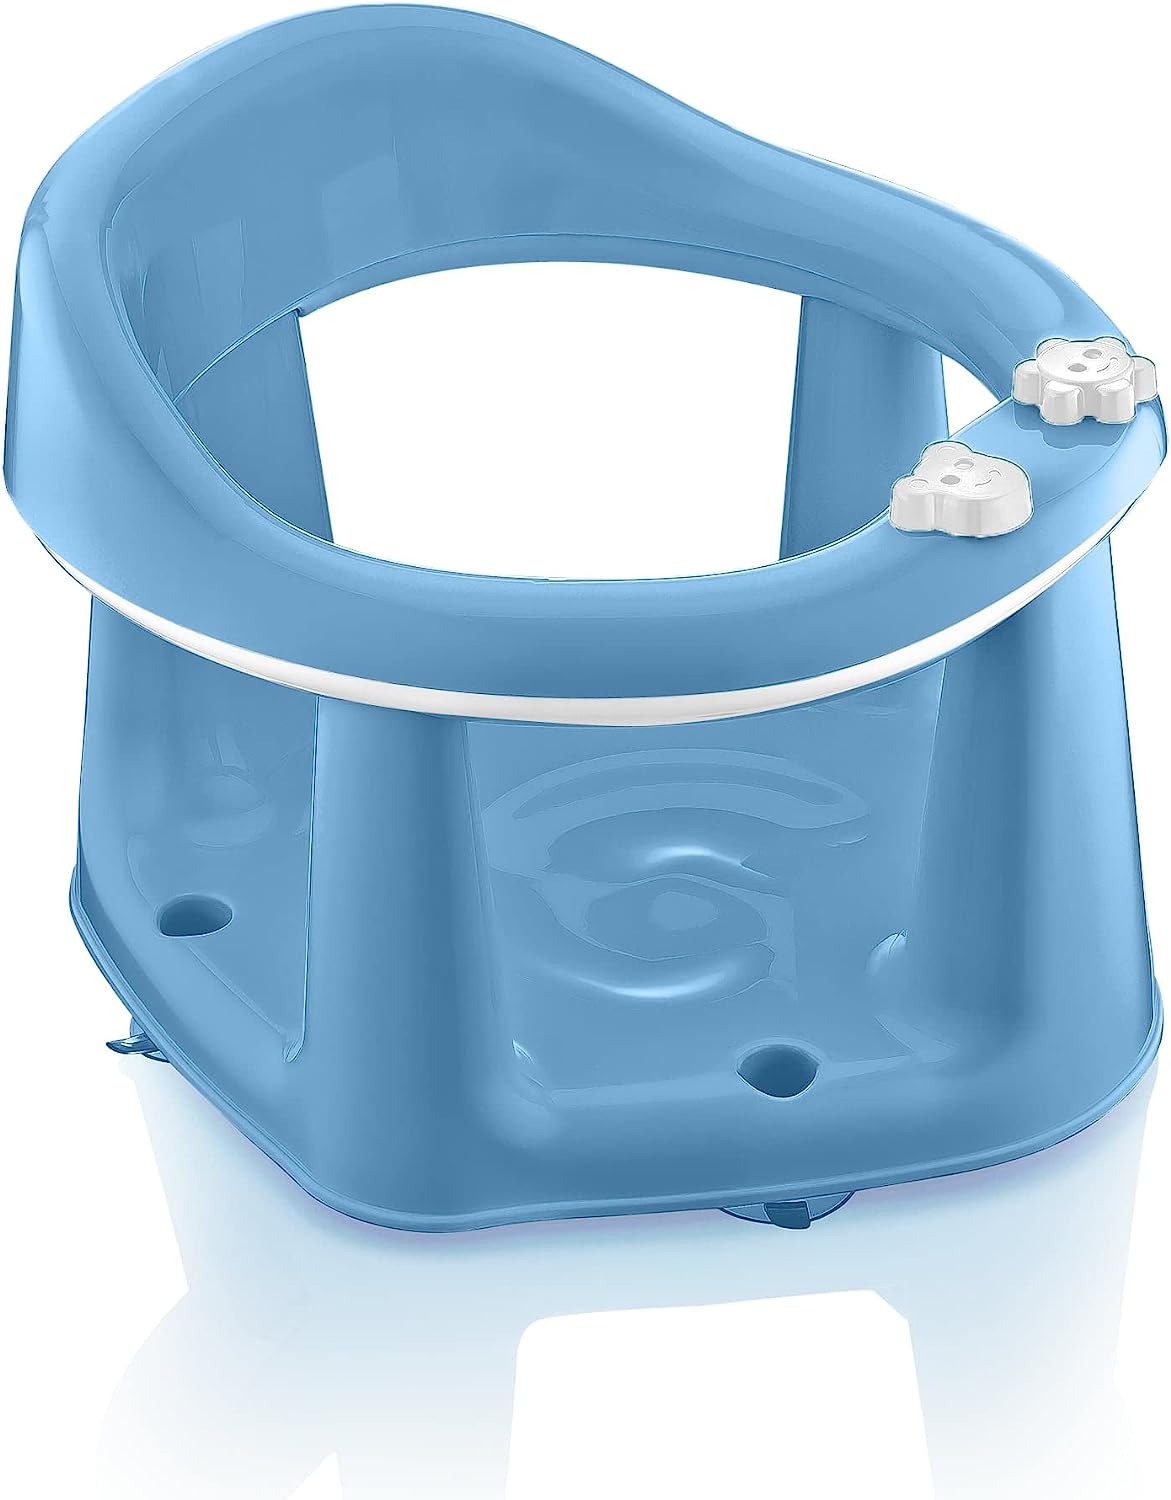 3-in-1 Baby Bath Support Seat Blue